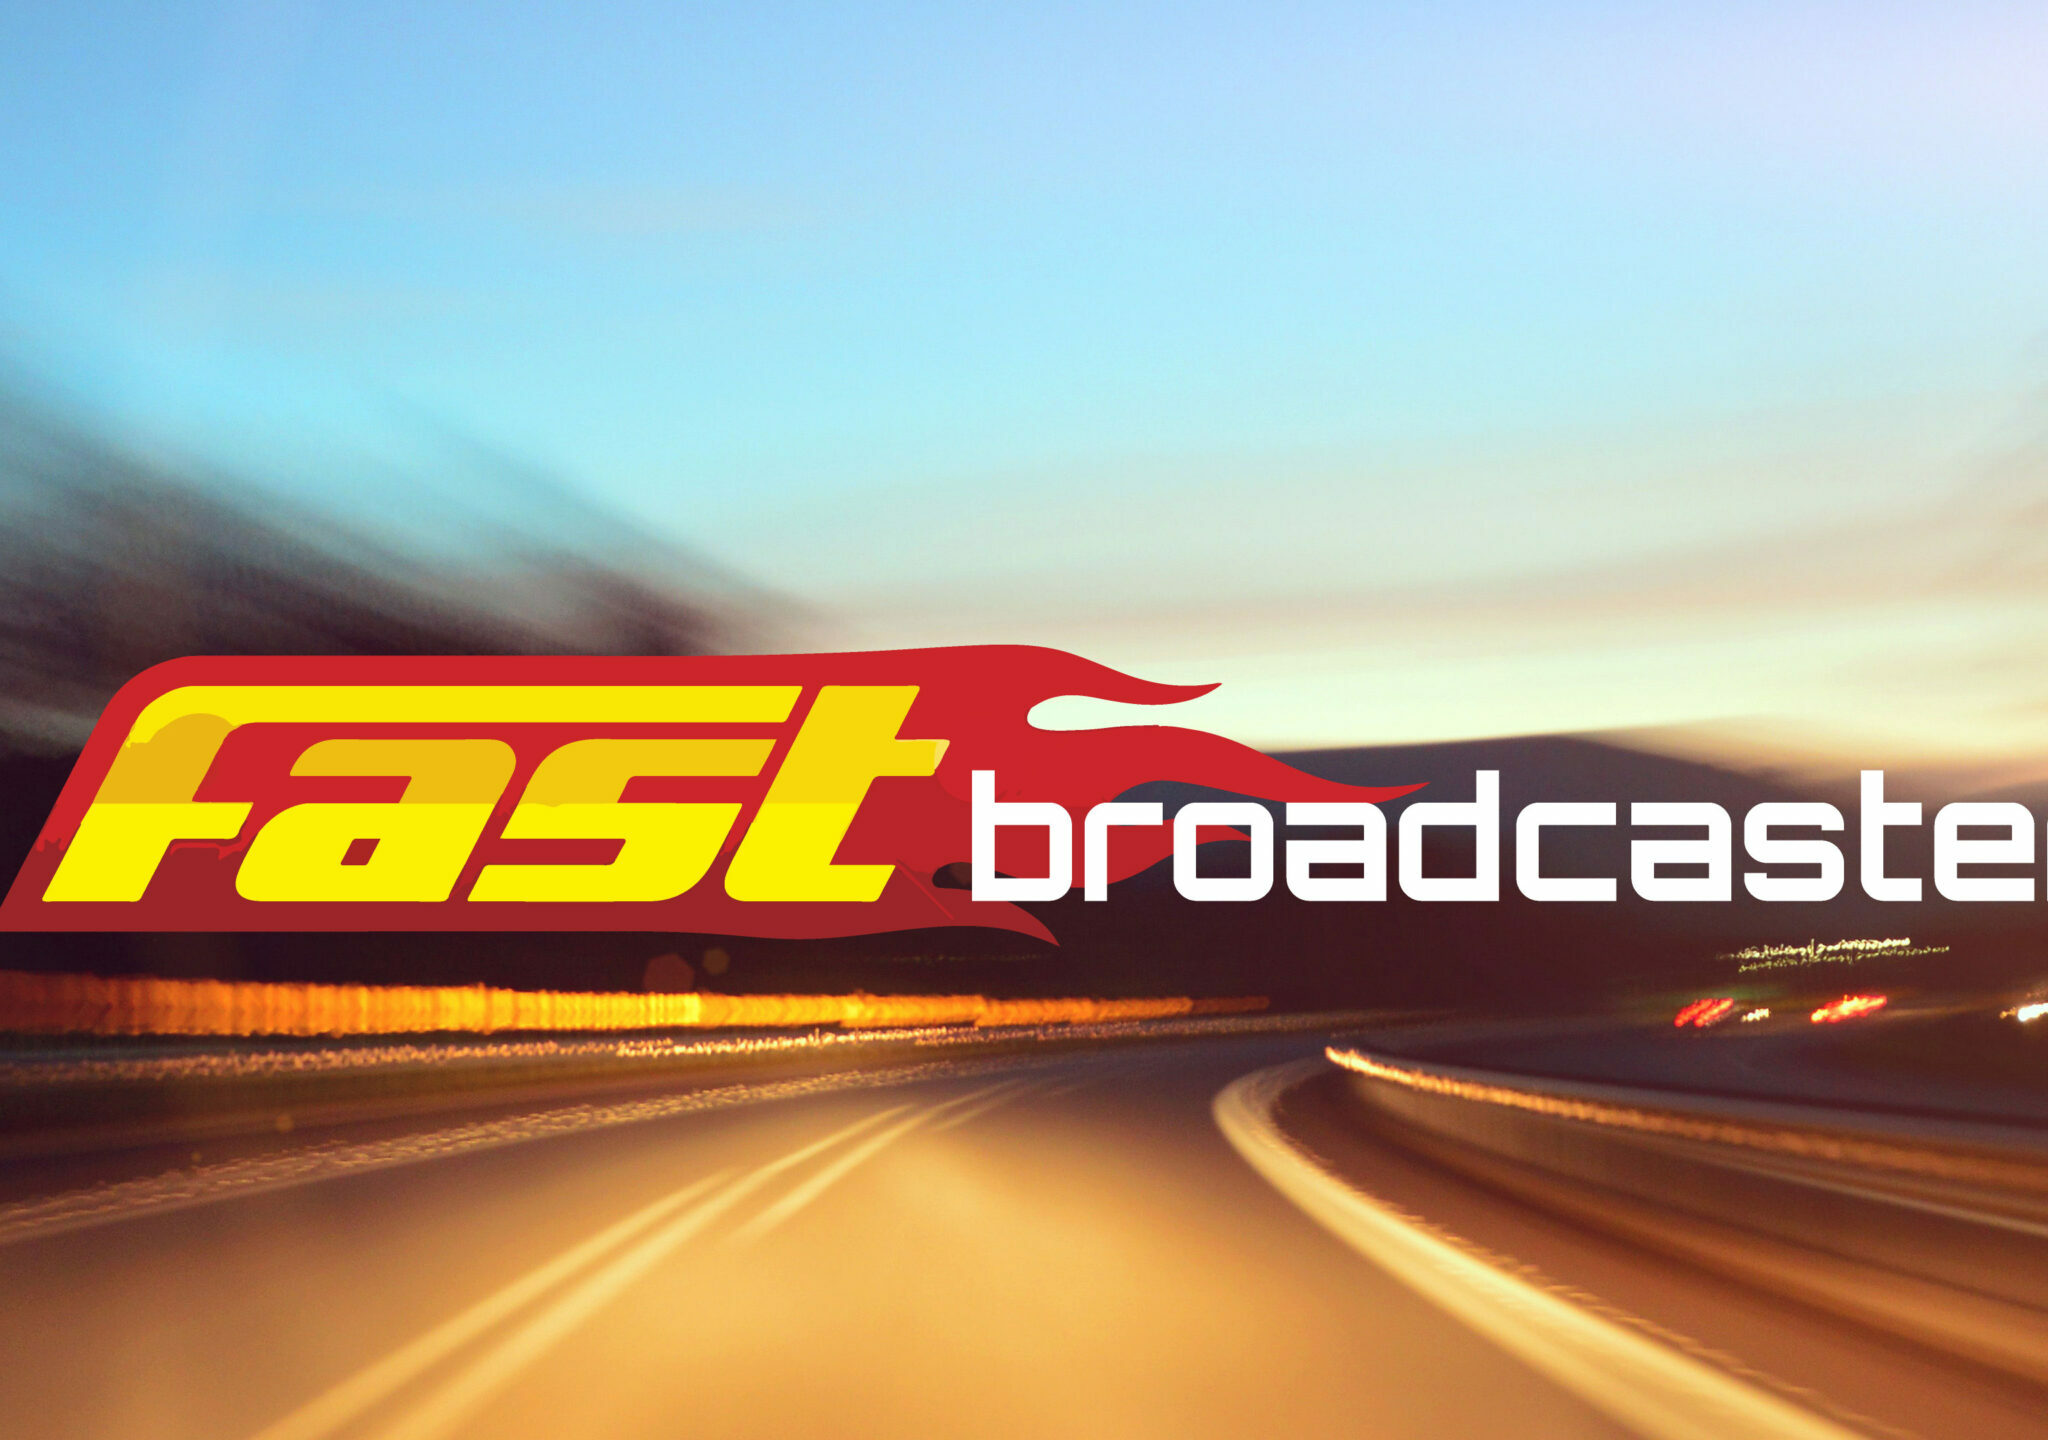 Streaming Broadcaster is rebranded to FAST Broadcaster as the buzz gets louder